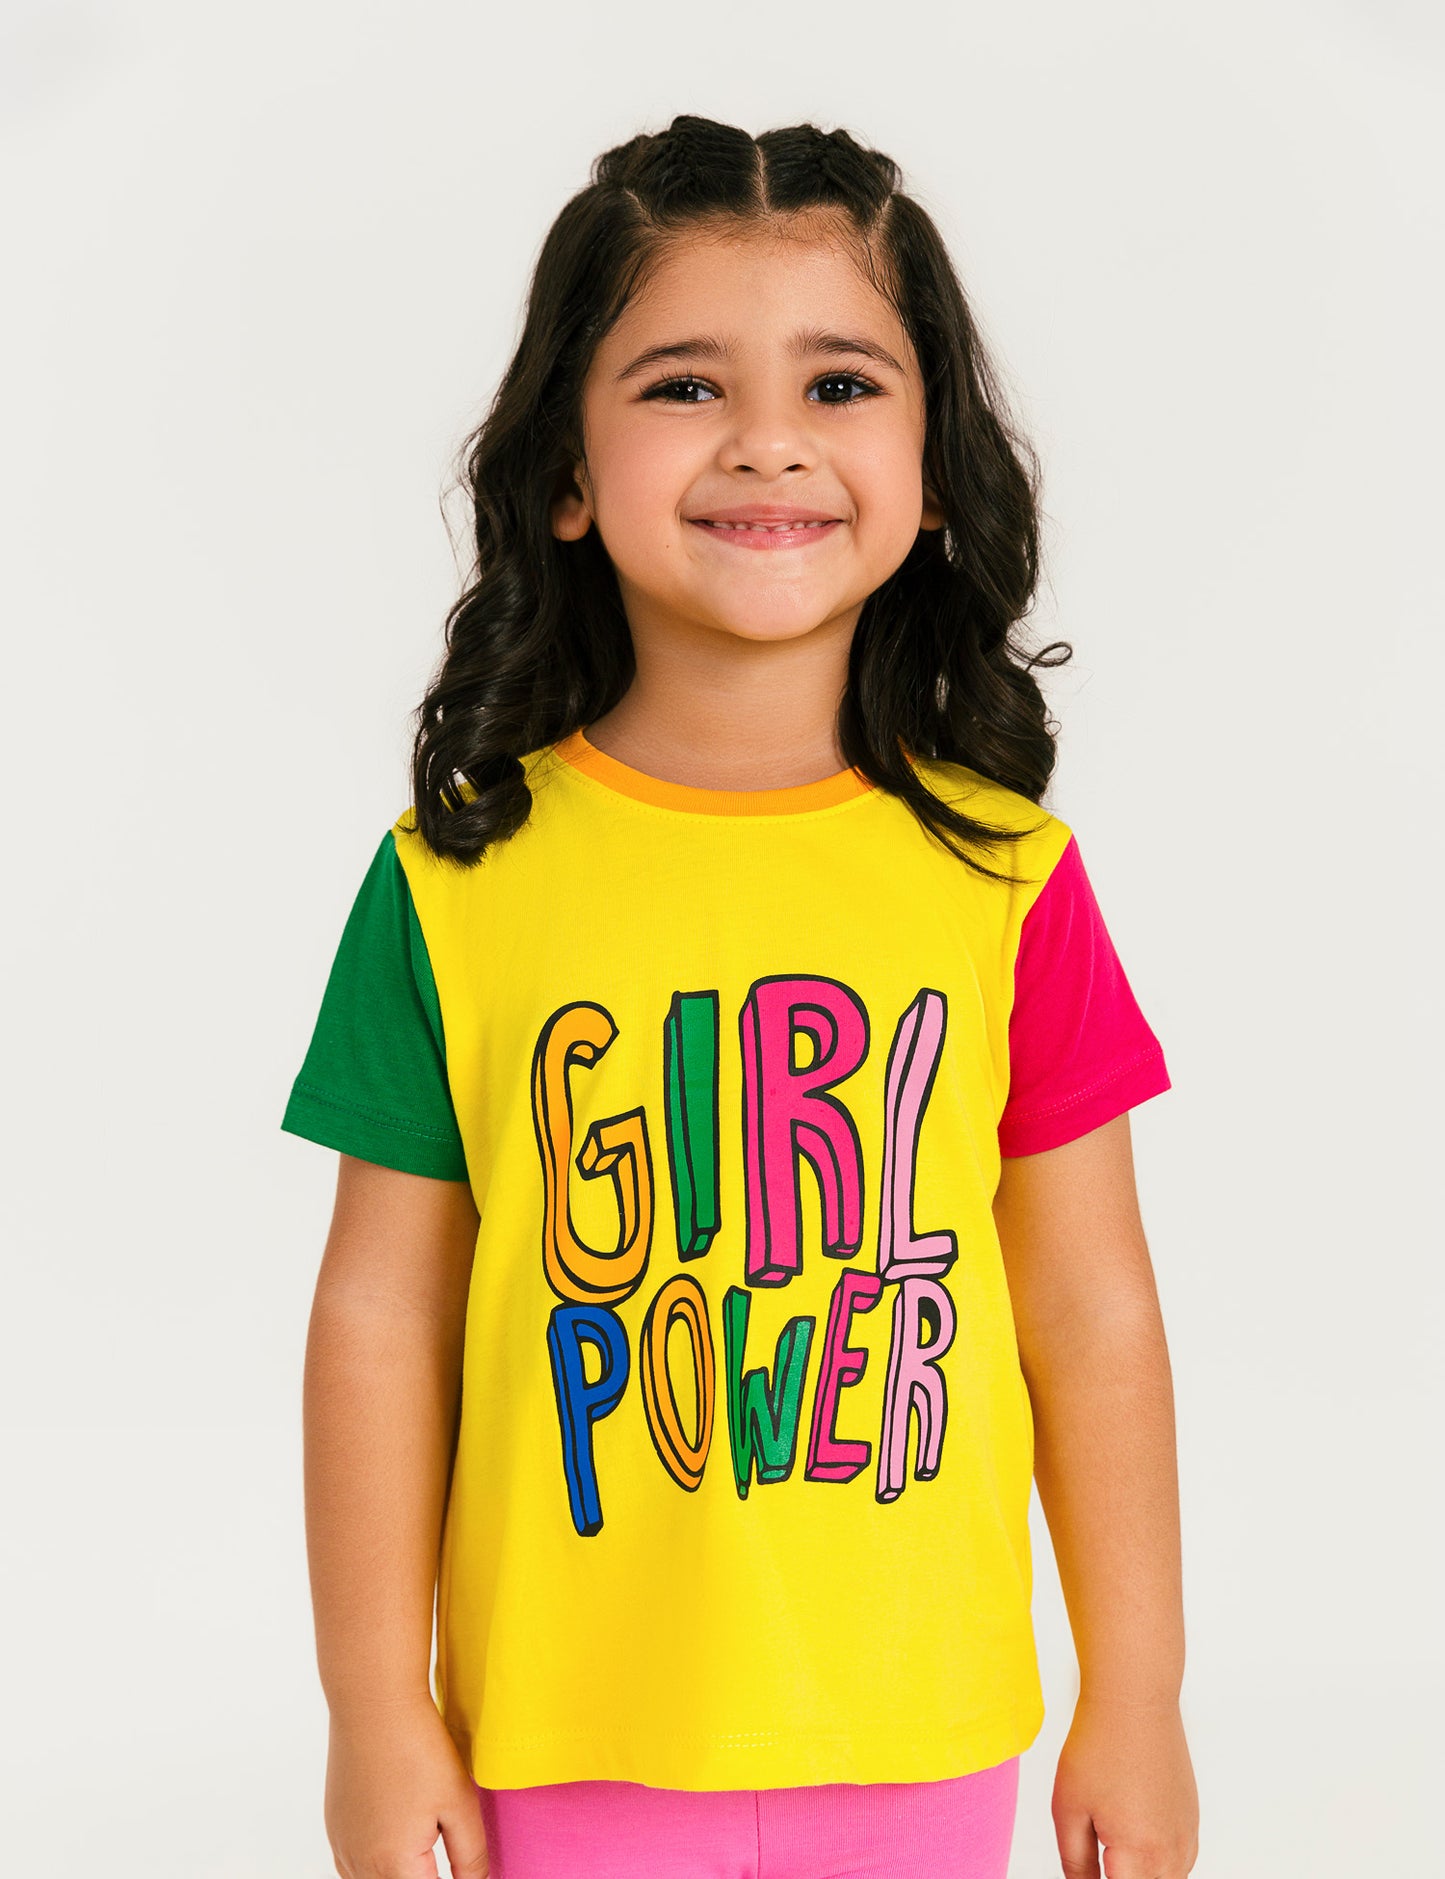 GIRL POWER GRAPHIC T-SHIRTS